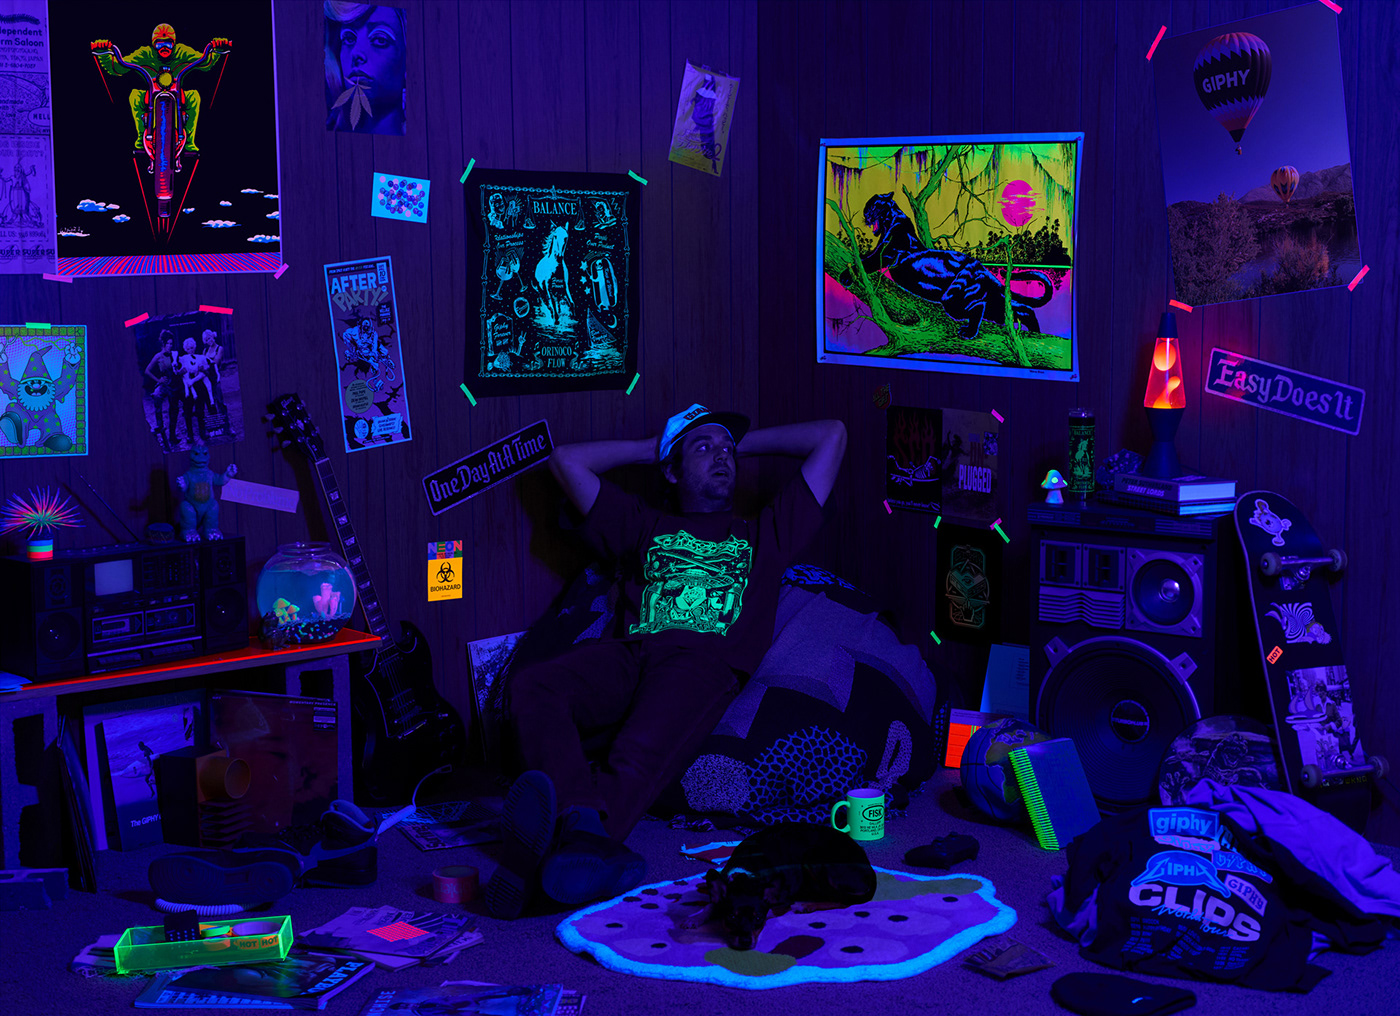 Assorted GIPHY Merchandise in context under black light